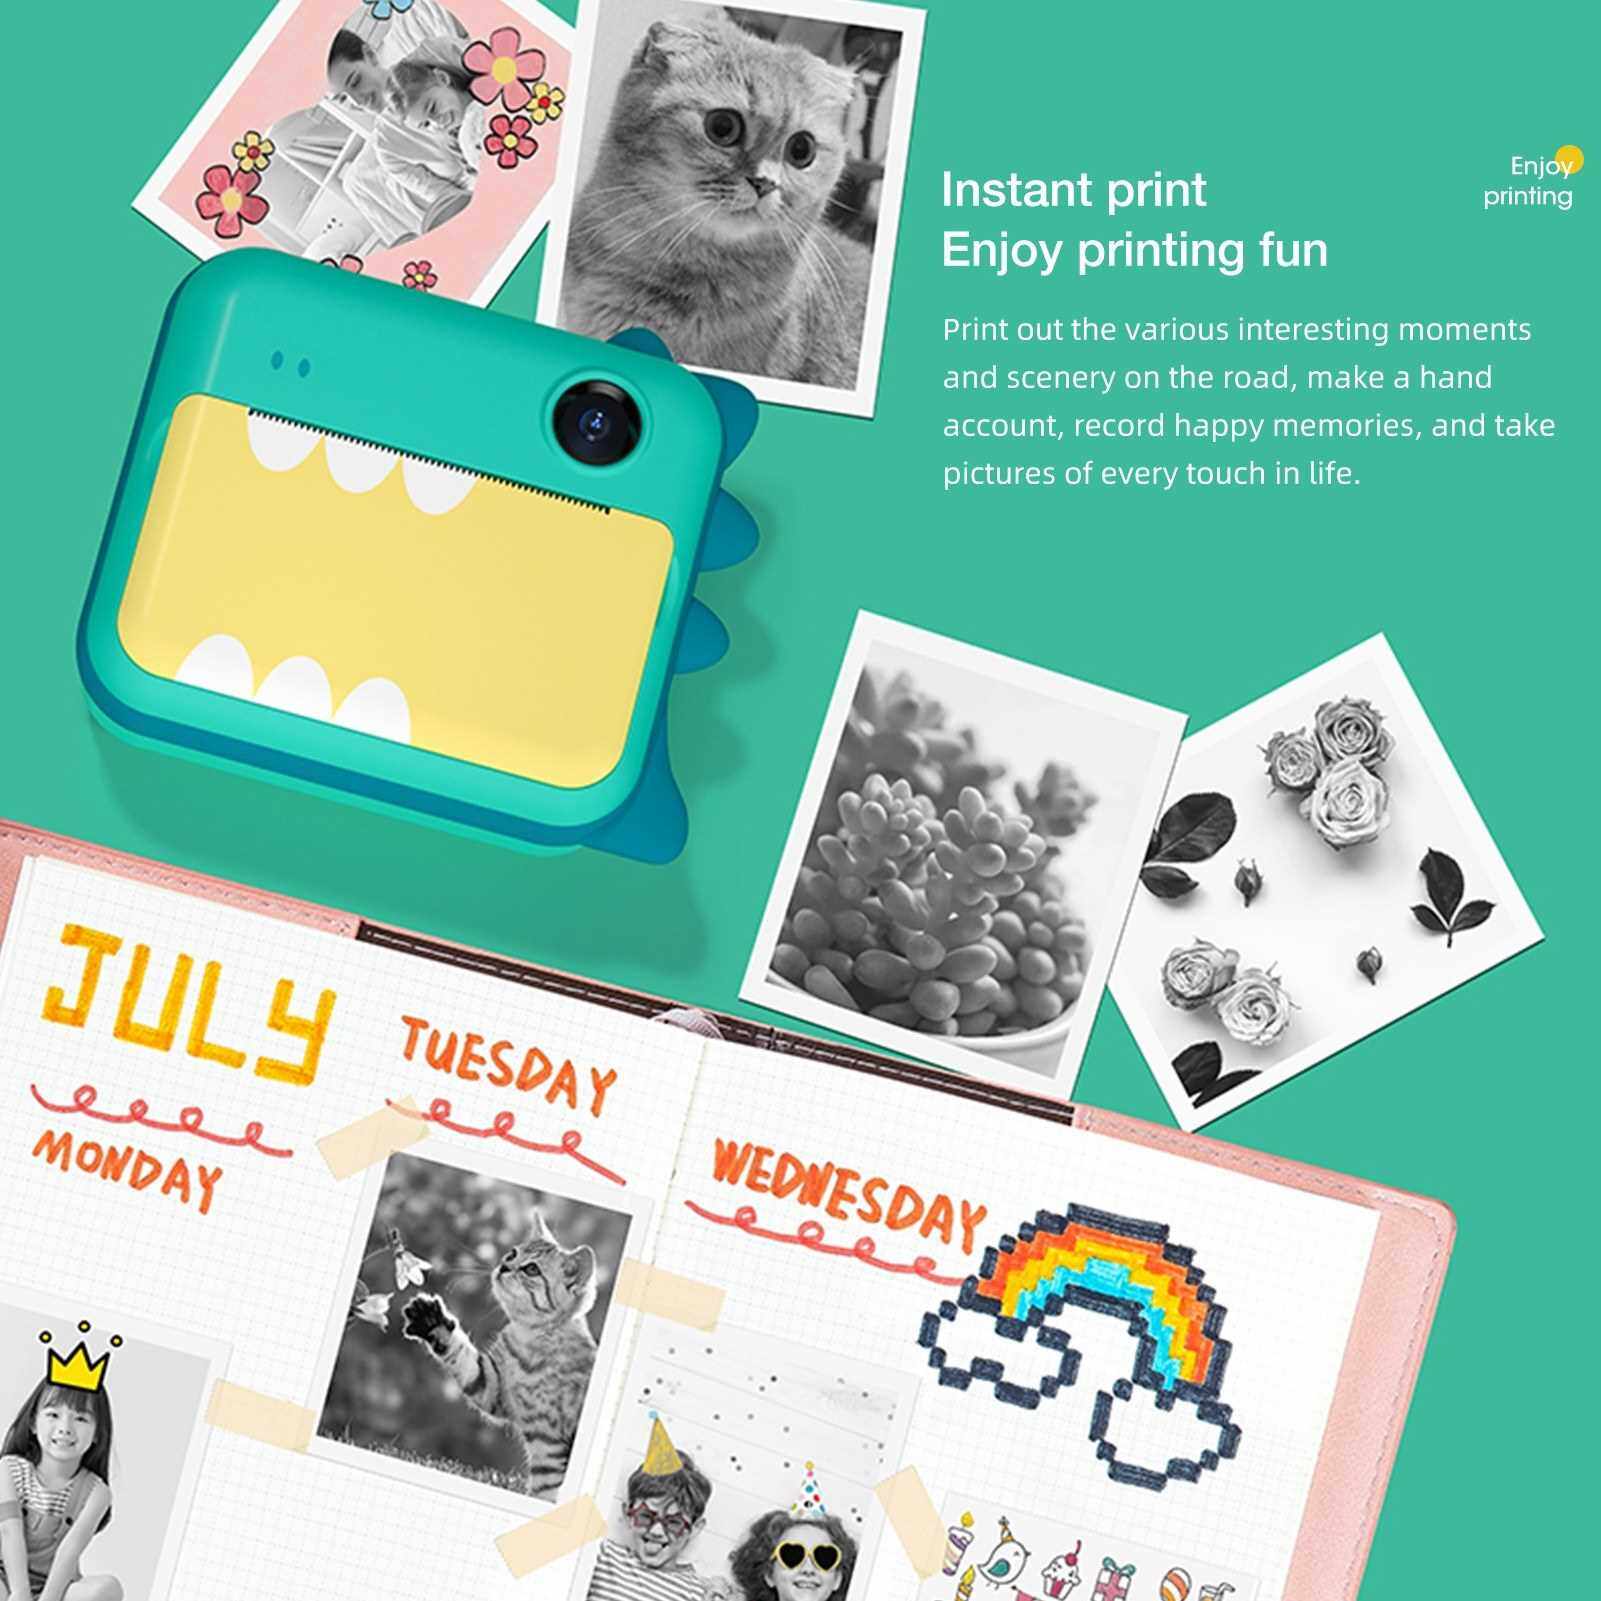 P1 Kids Camera 32GB Children Instant Camera Photo Printer 2.4 inch IPS Screen Christmas Birthday Gifts for Girls with Printing Paper Support WIFI Transmissin Applicable to Self-adhesive Photo Paper (Green)